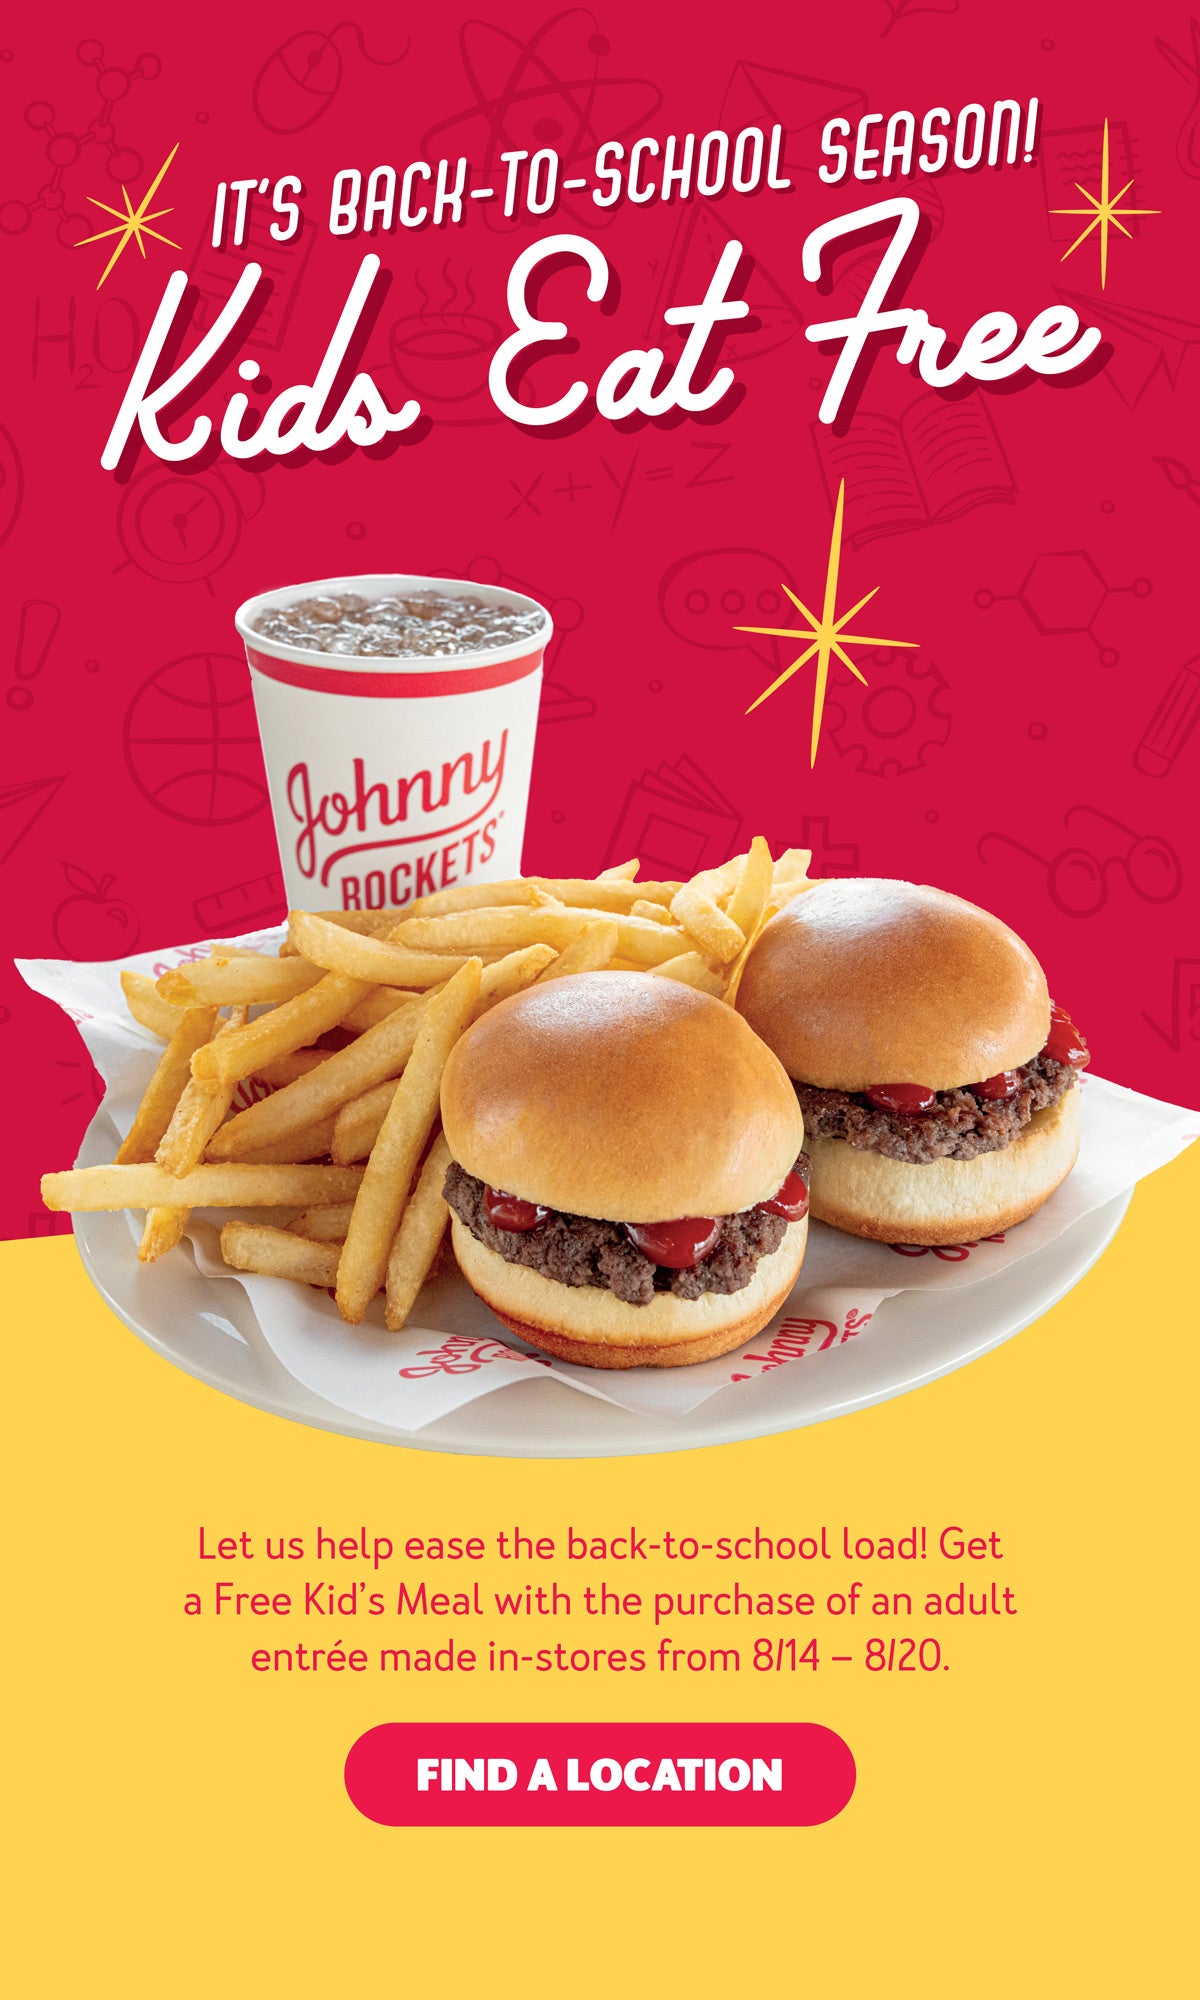 Get a Free Kid's Meal with Adult Entree Purchase